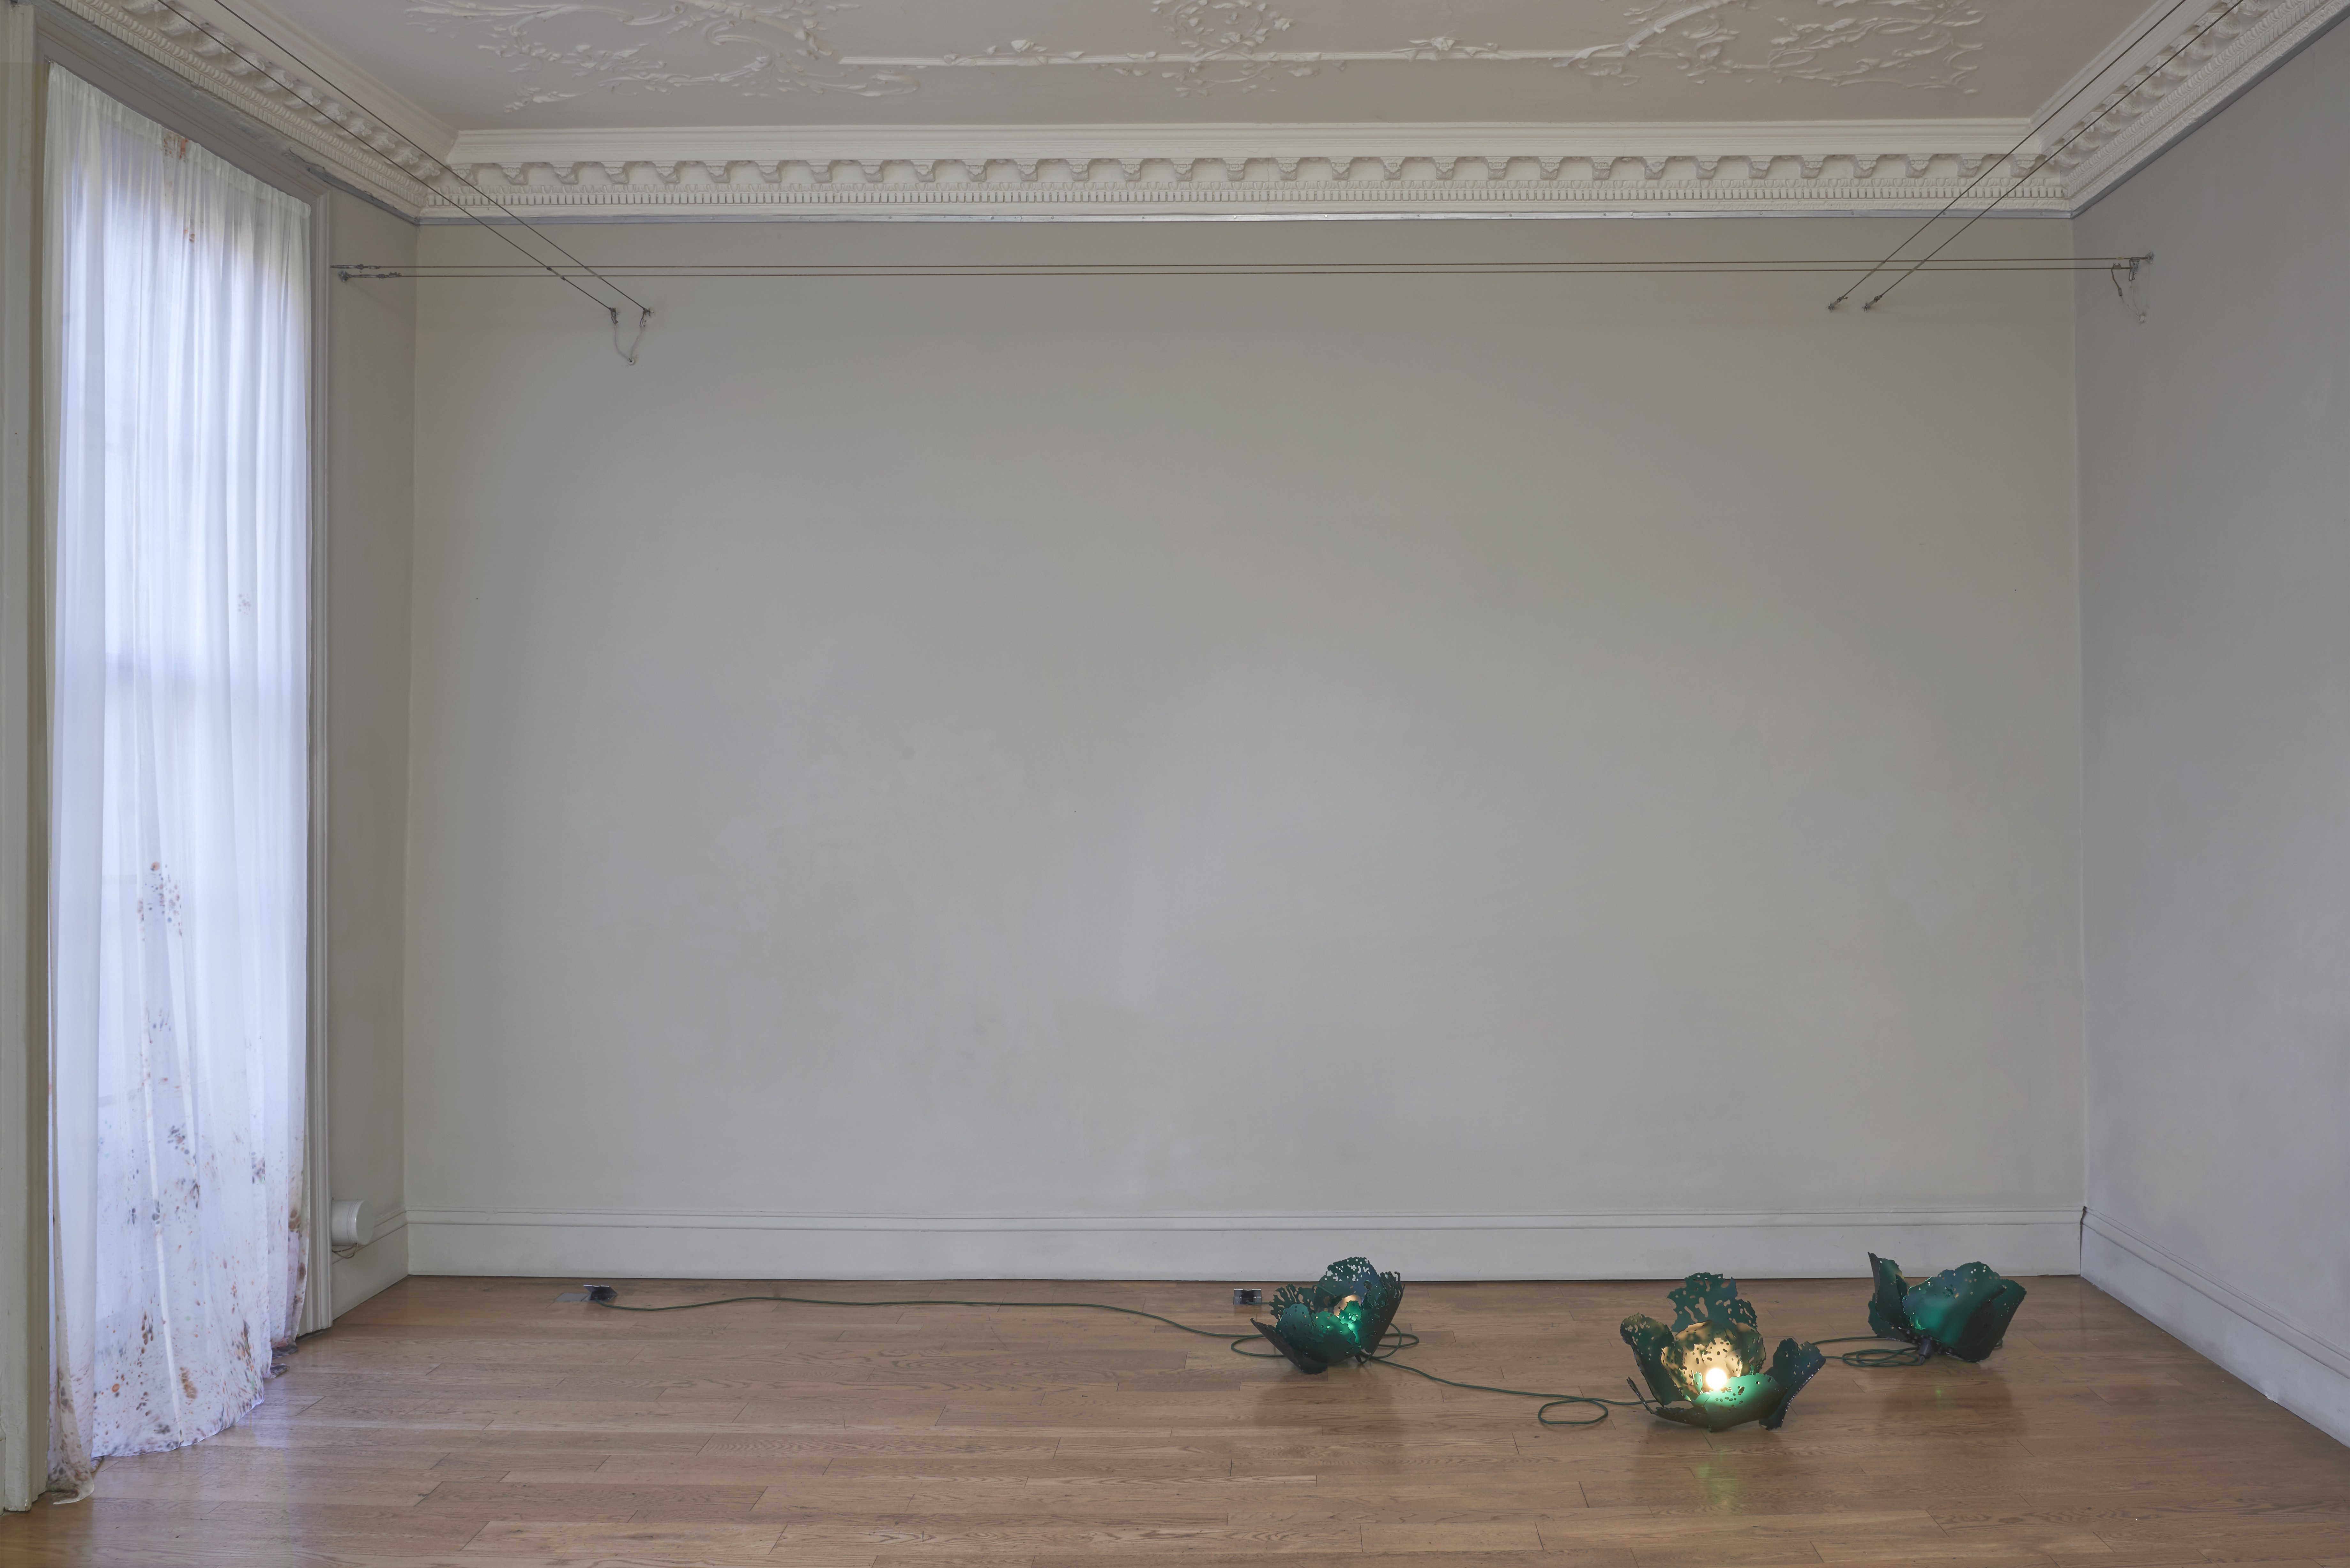 Rachel Adams 'Rising Damp' (detail) 3 × fabric paint on silk, 325×144 cm (each) and 'Brassica' (group) frost acrylic, electric cable, metal fixings 36×45×45 cm, 2022; installation photography by Andy Keate